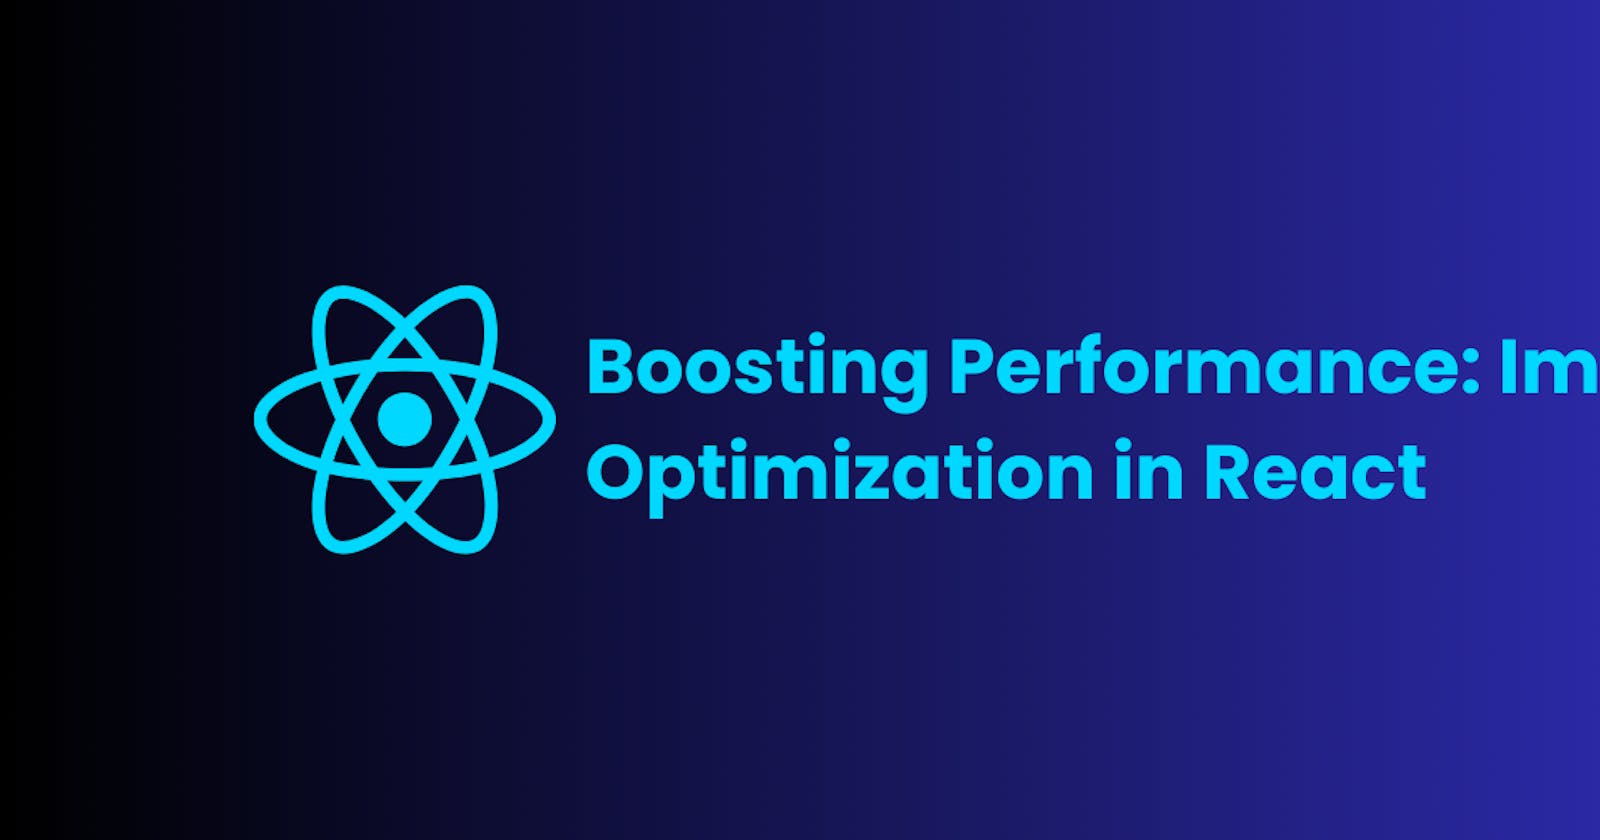 Boosting Performance: Image Optimization in React